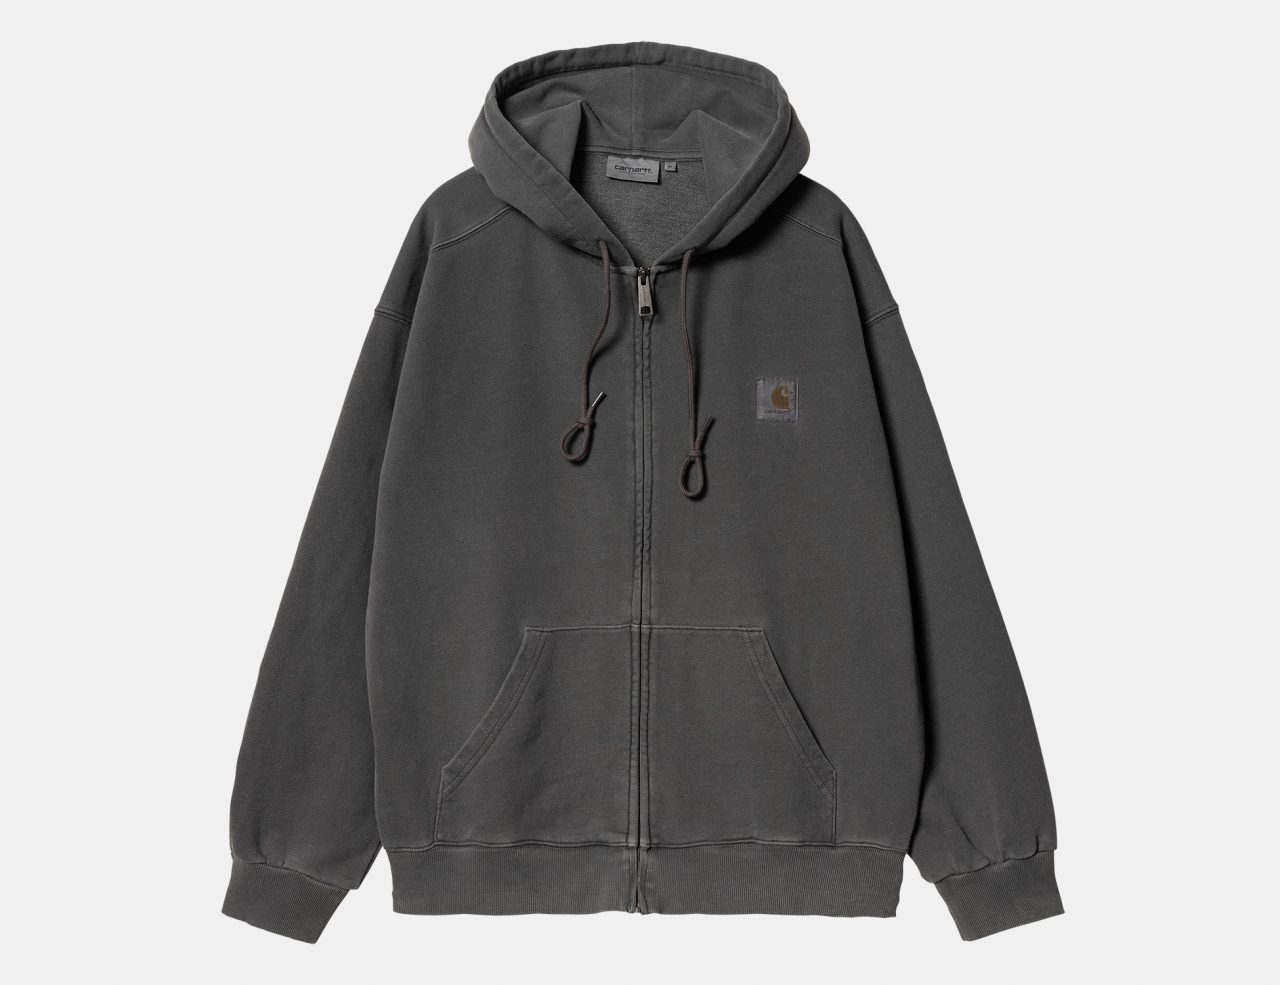 Carhartt WIP Nelson Hoodie Jacket - Charcoal Garment Dyed